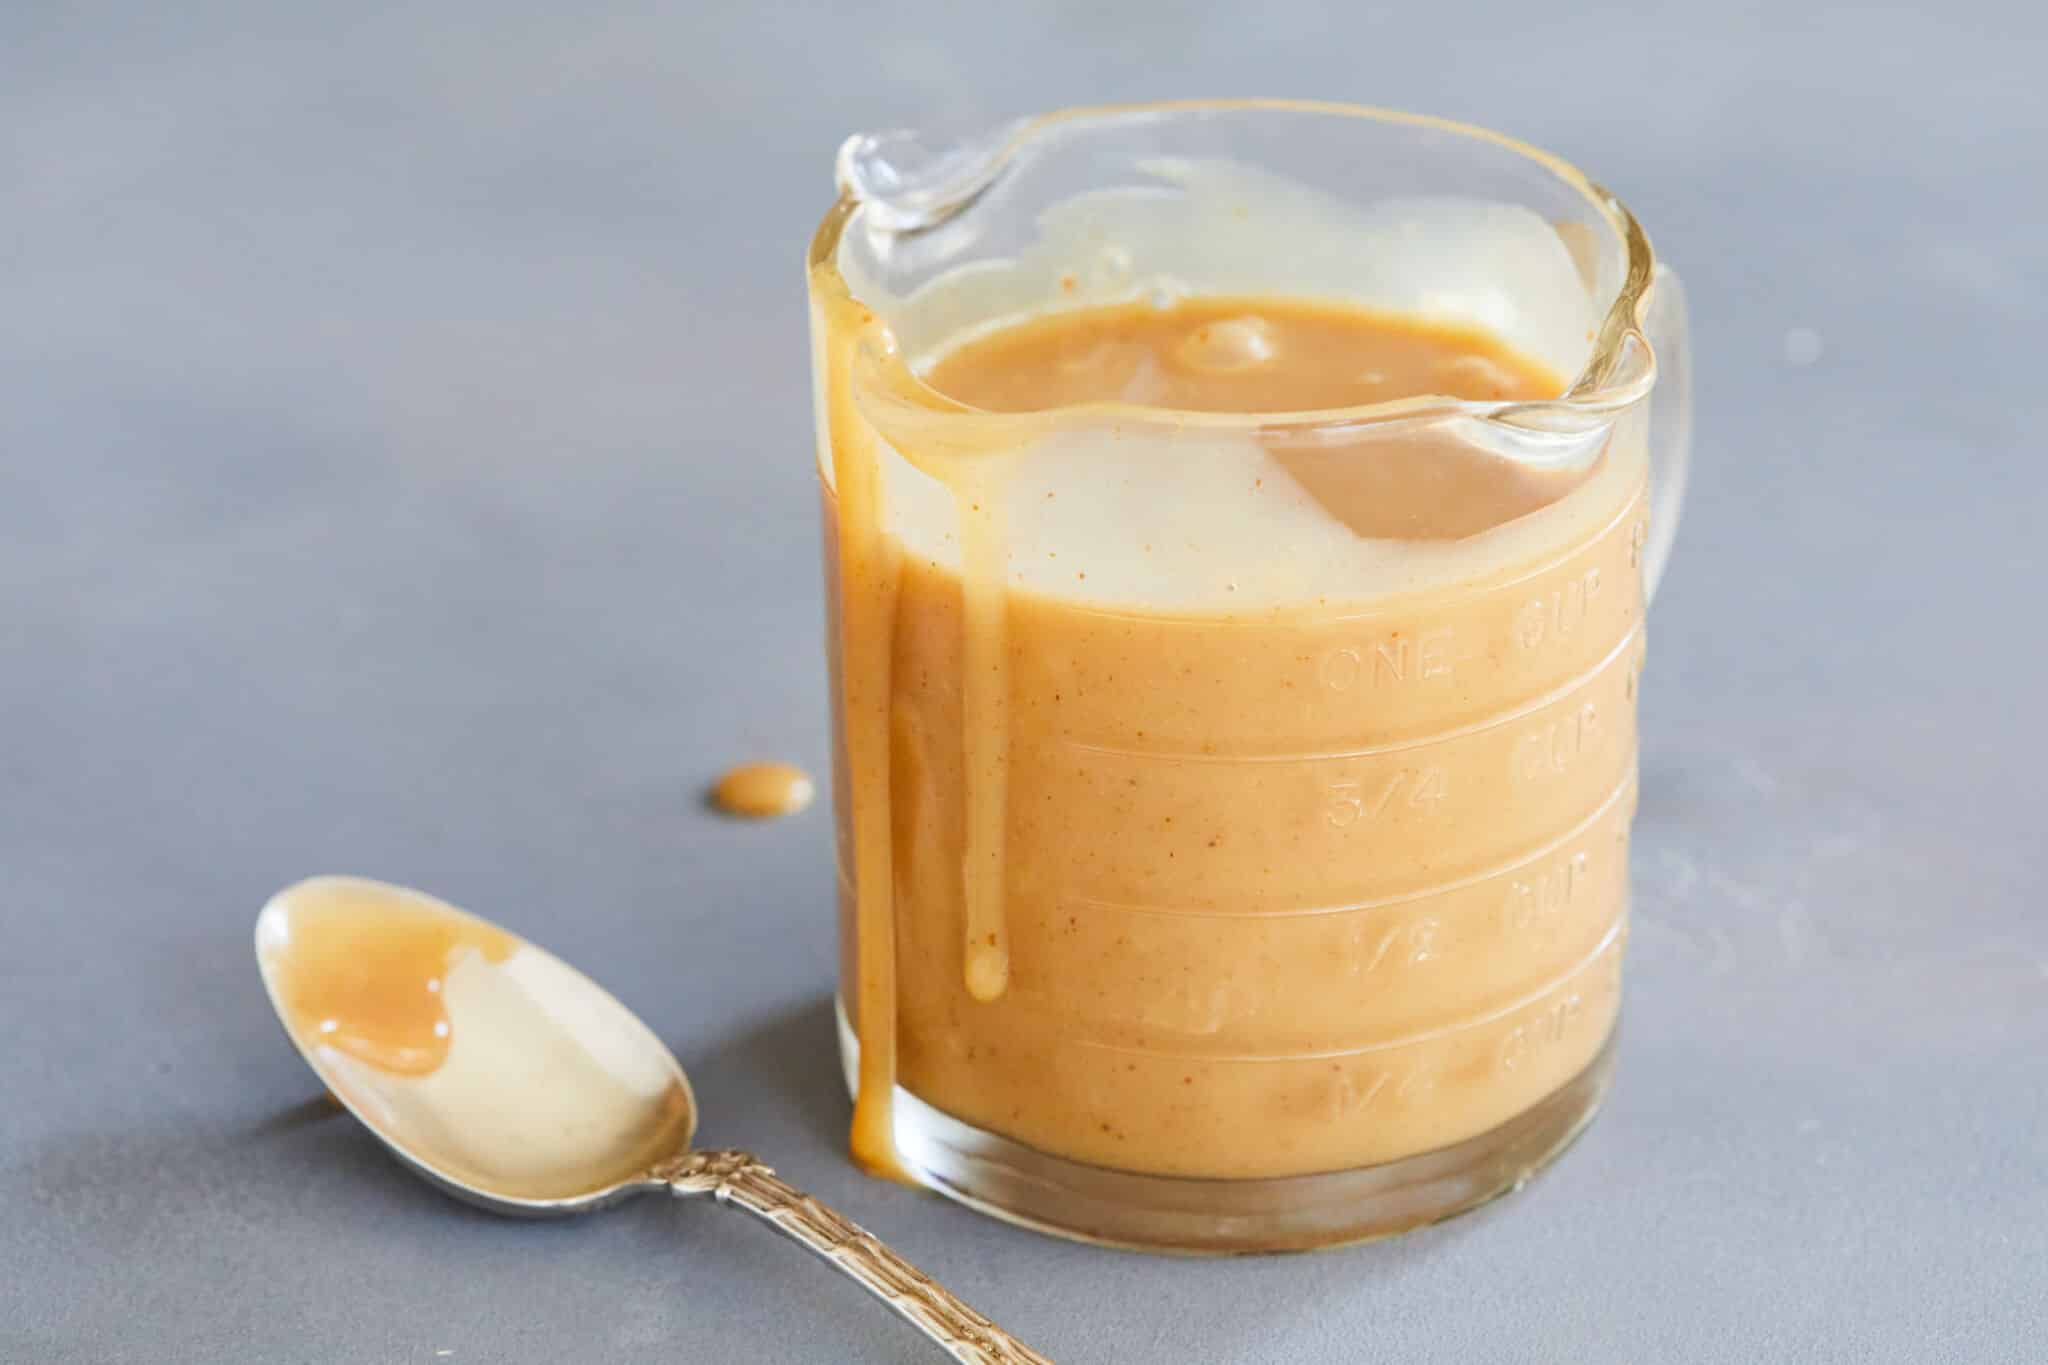 The velvety smooth peanut butter ice cream sauce is served in a 3-spout glass measuring jug, with extra dripping down on the side and a spoon next to it.